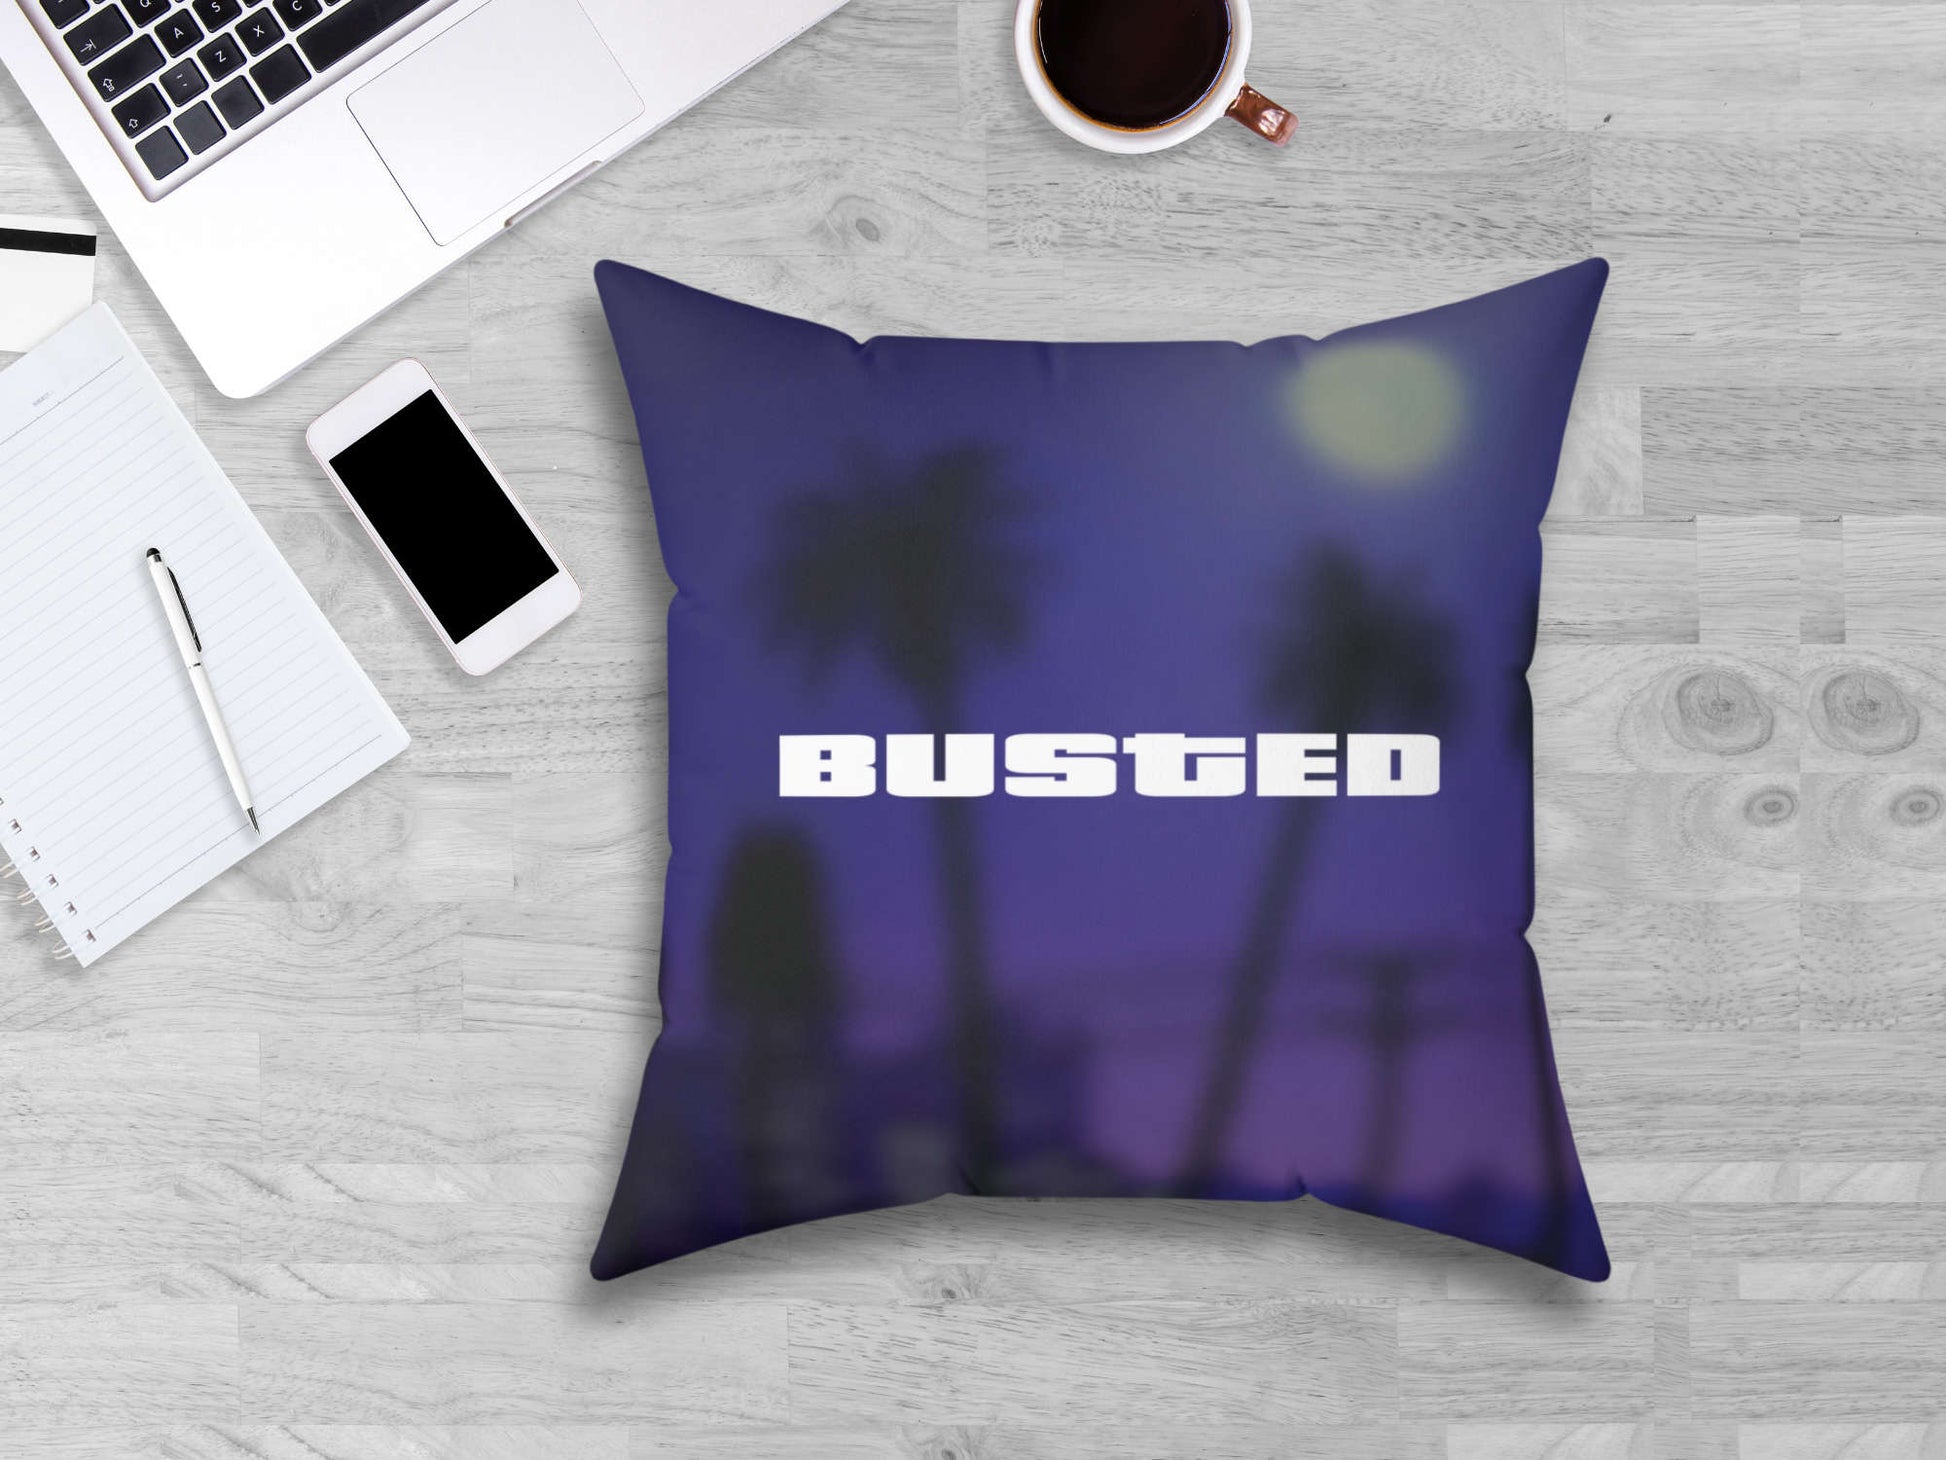 Wasted-Busted Square Pillow -